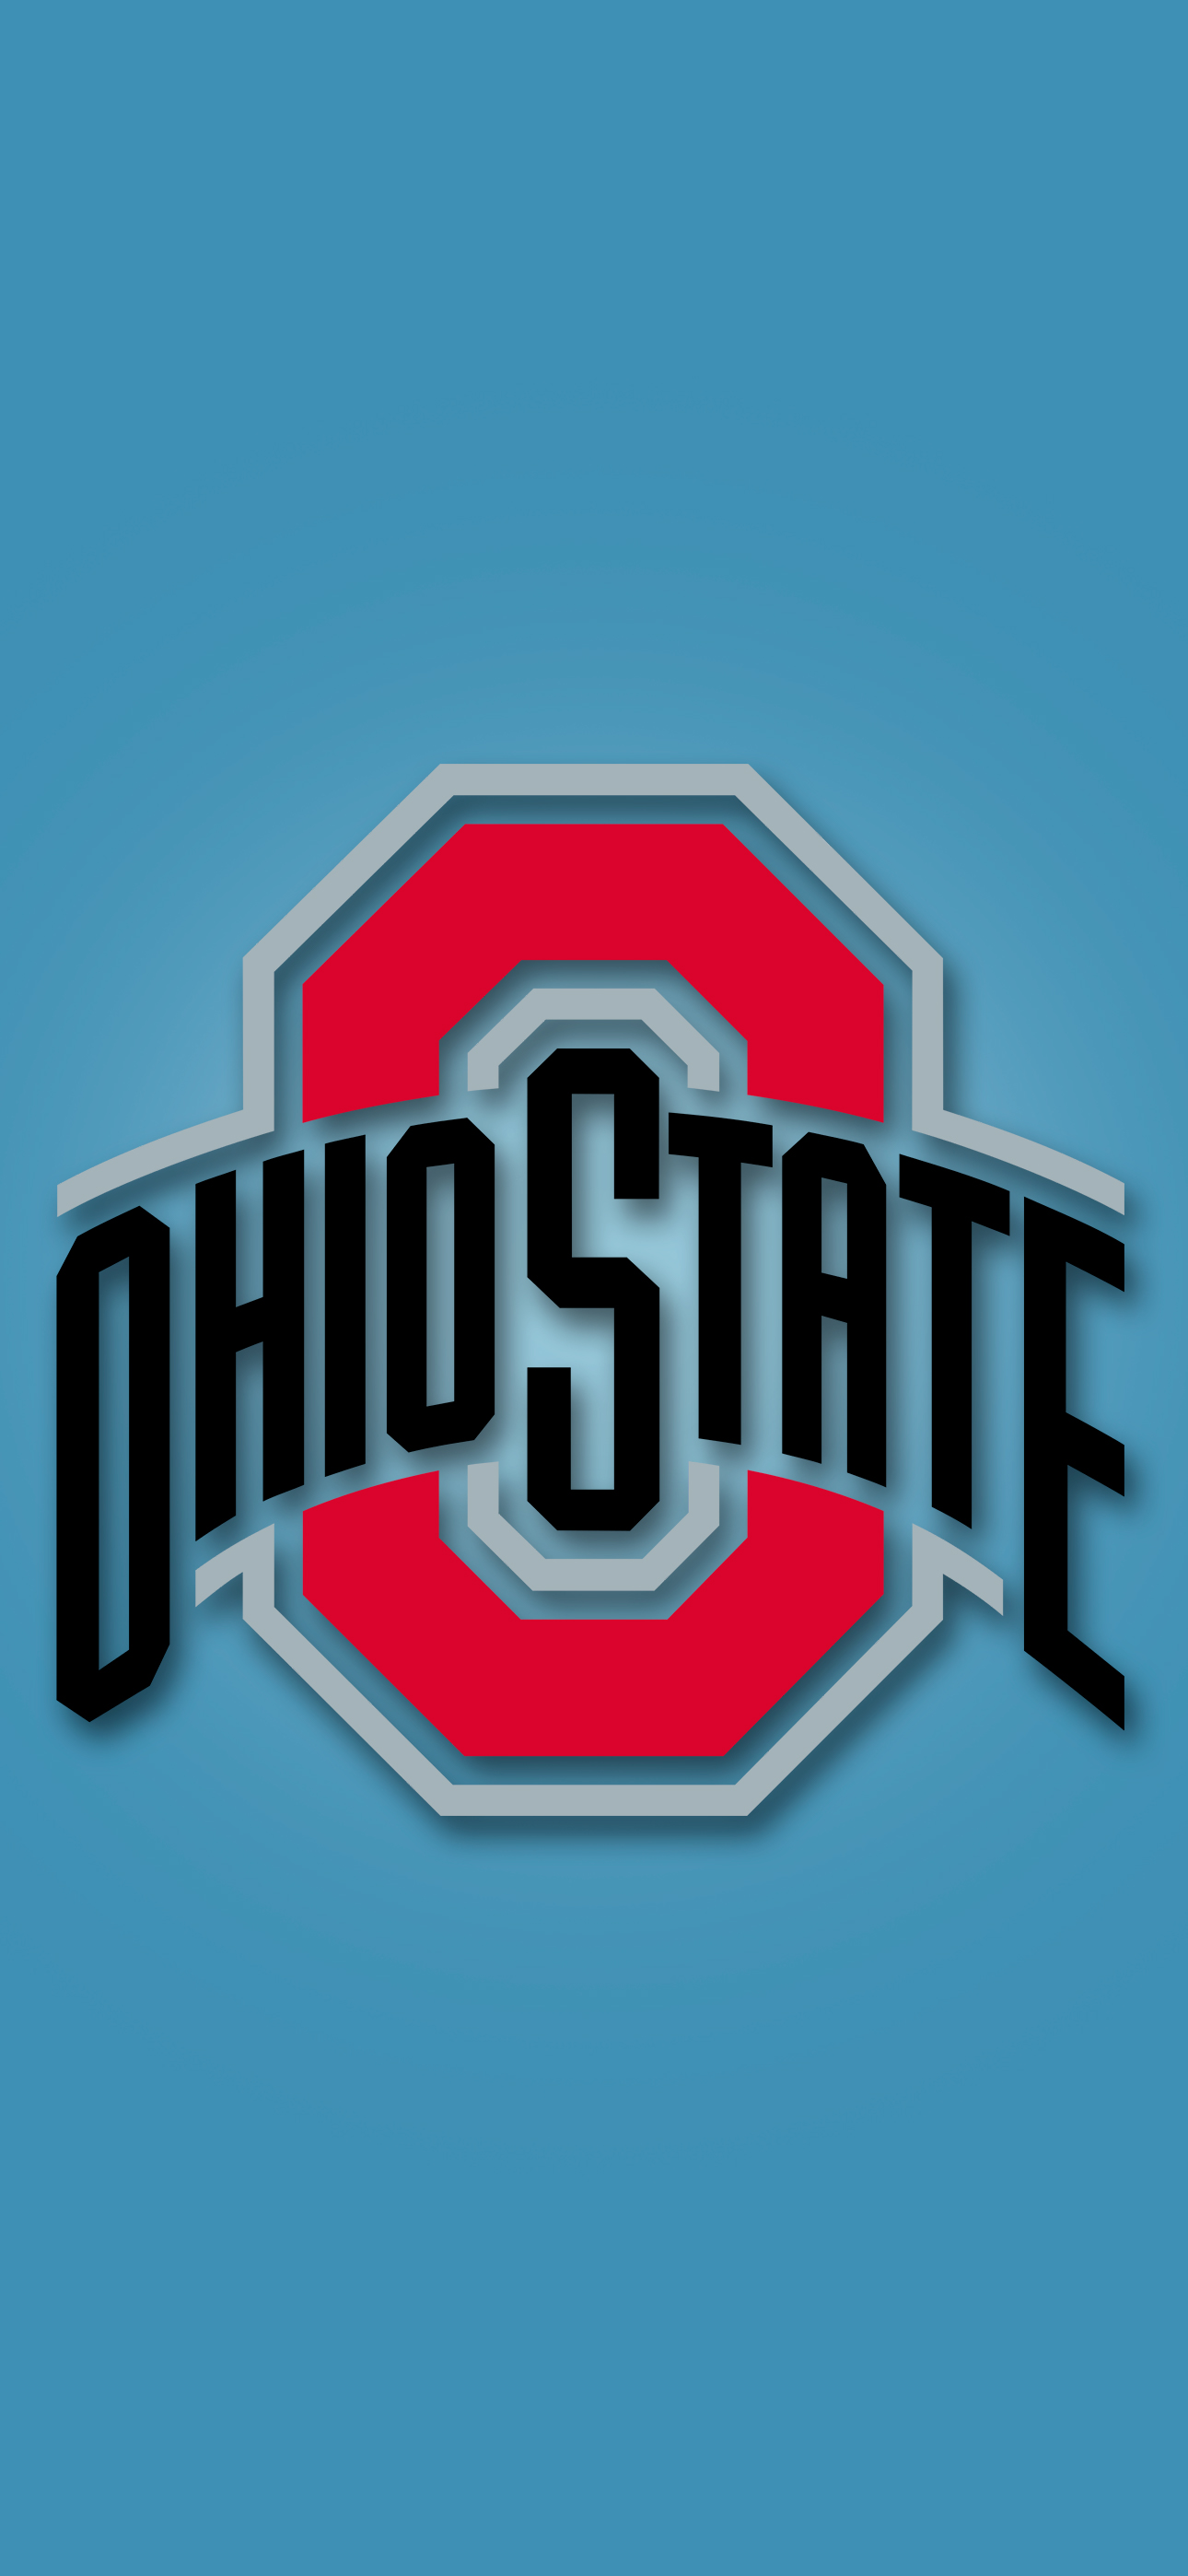 Download Ohio State In 4K 8K Free Ultra HQ For iPhone Mobile PC Wallpaper   GetWallsio